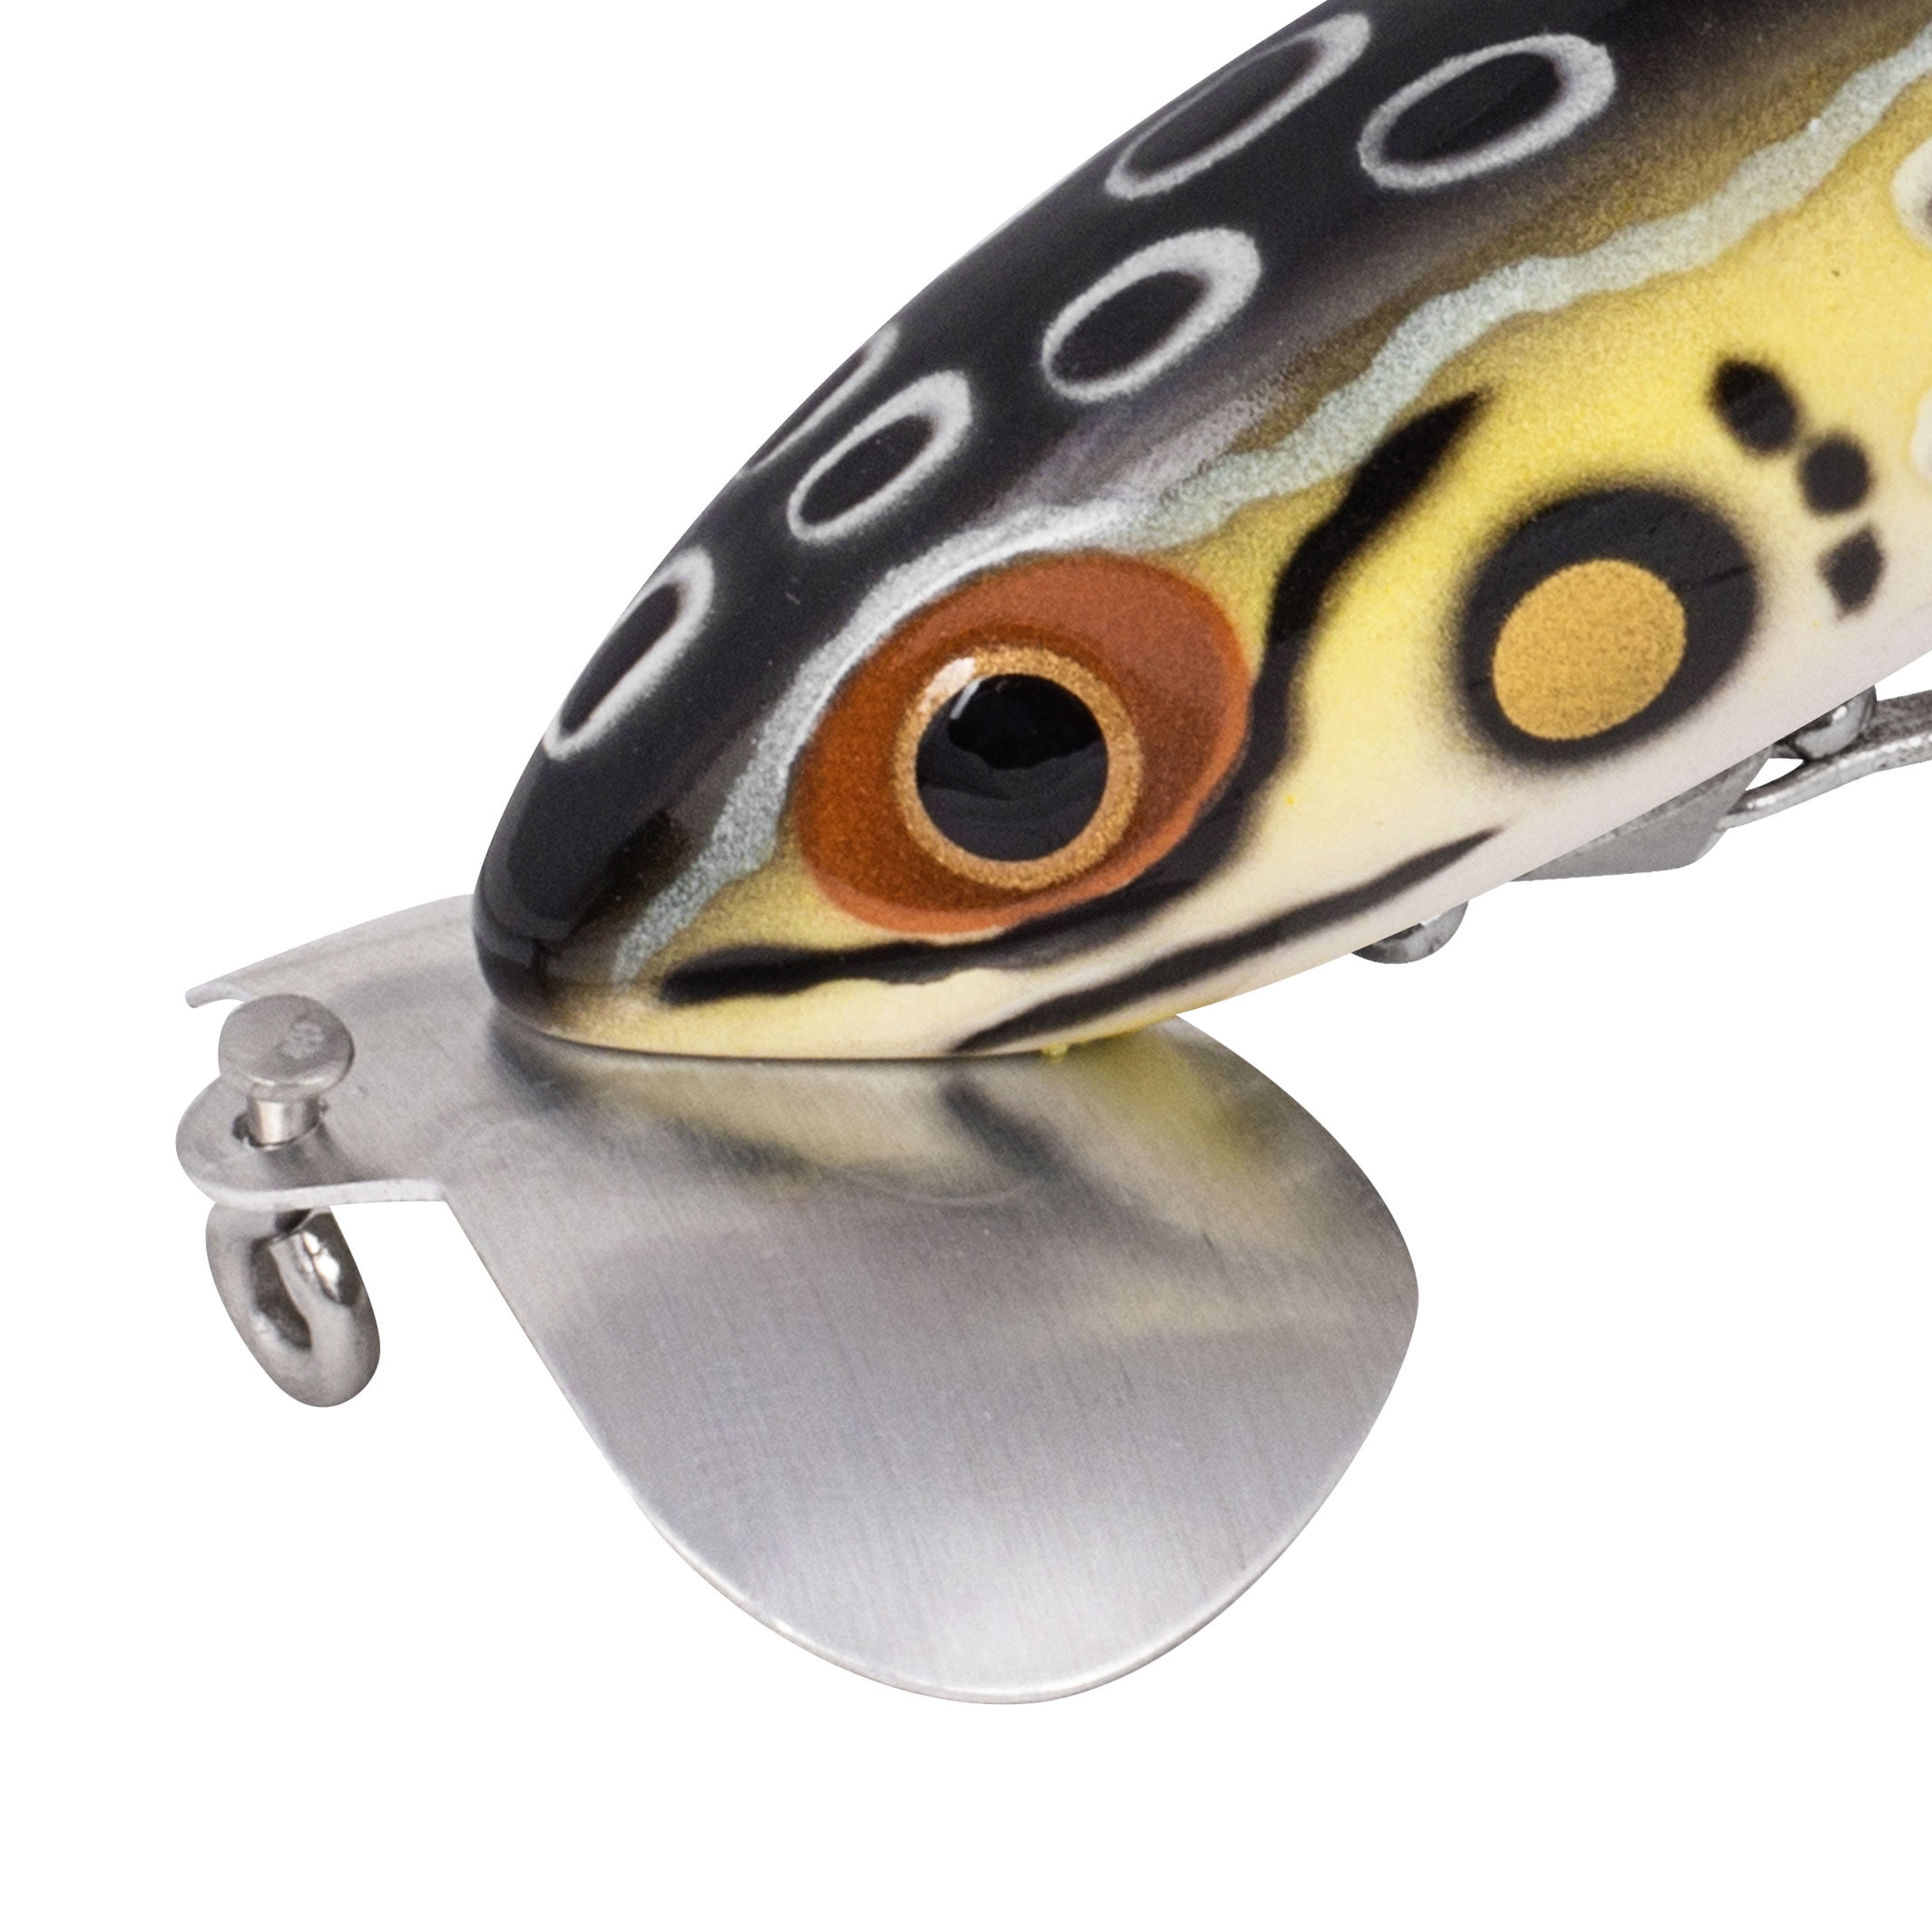 Jitterbug Topwater Lure, 2, 1/4 oz, Frog/White Belly, Floating